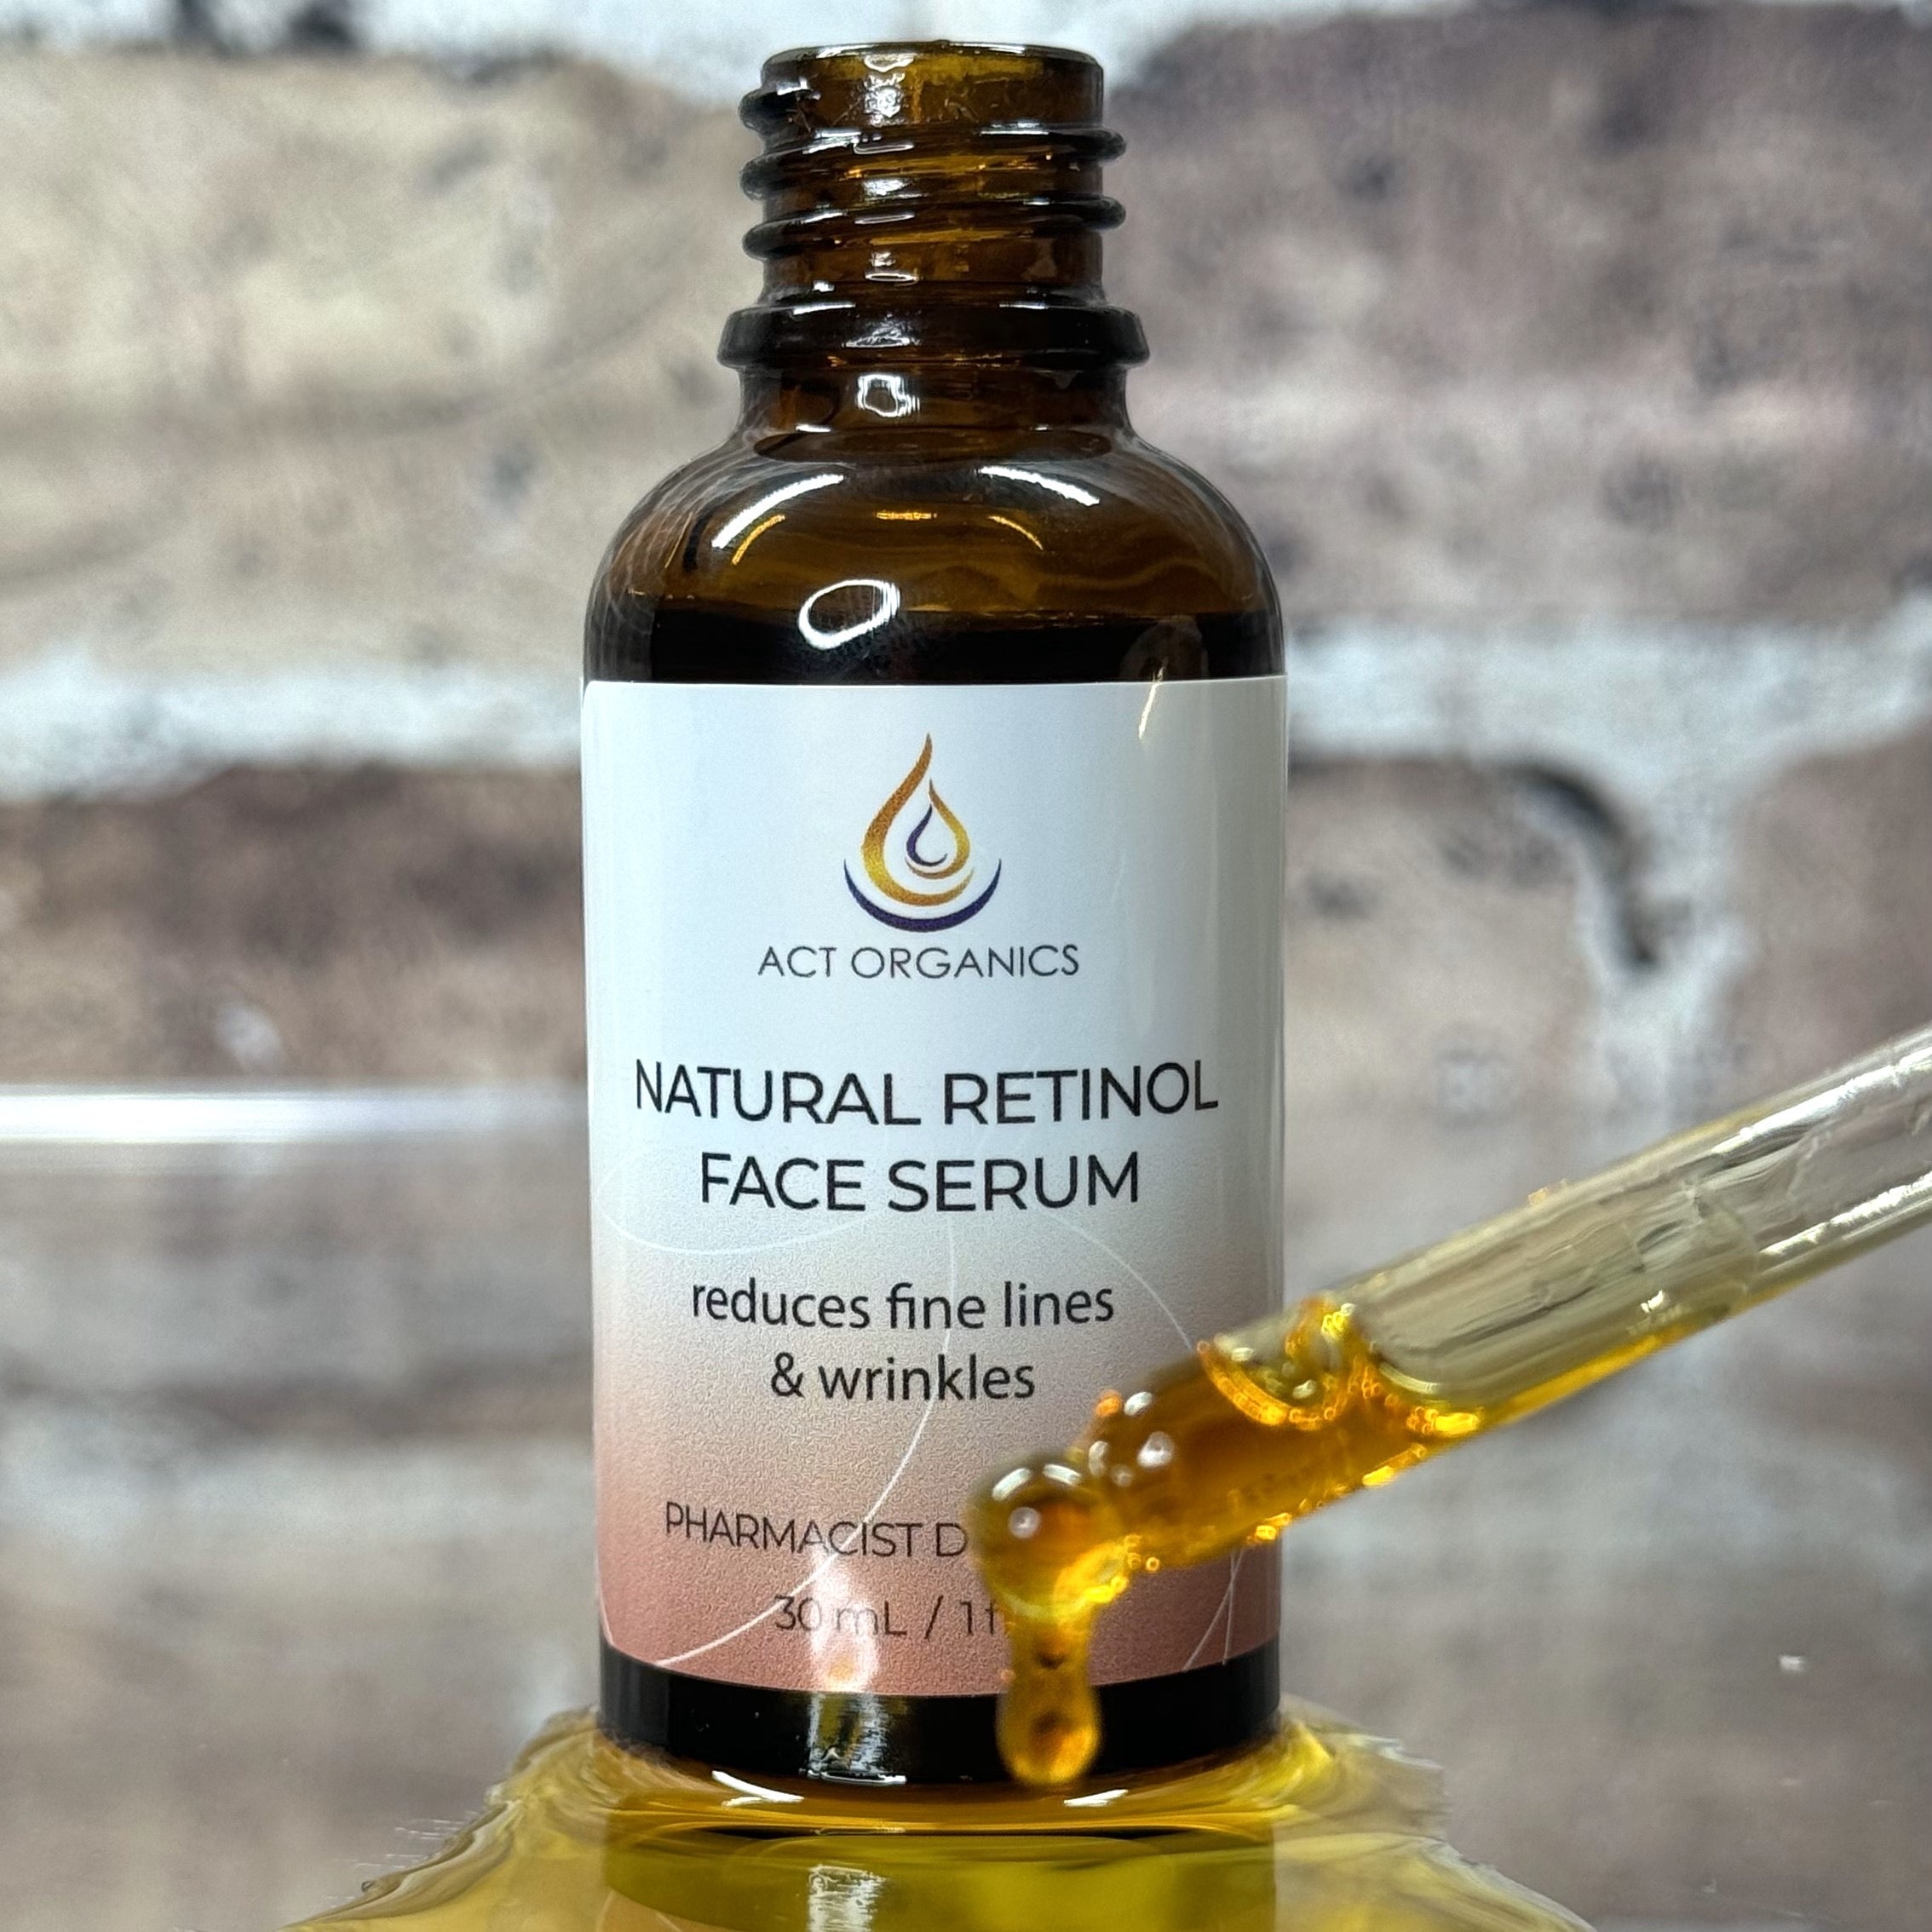 ACT Organics Natural Retinol Face Serum with Bakuchiol reduces fine lines and wrinkles